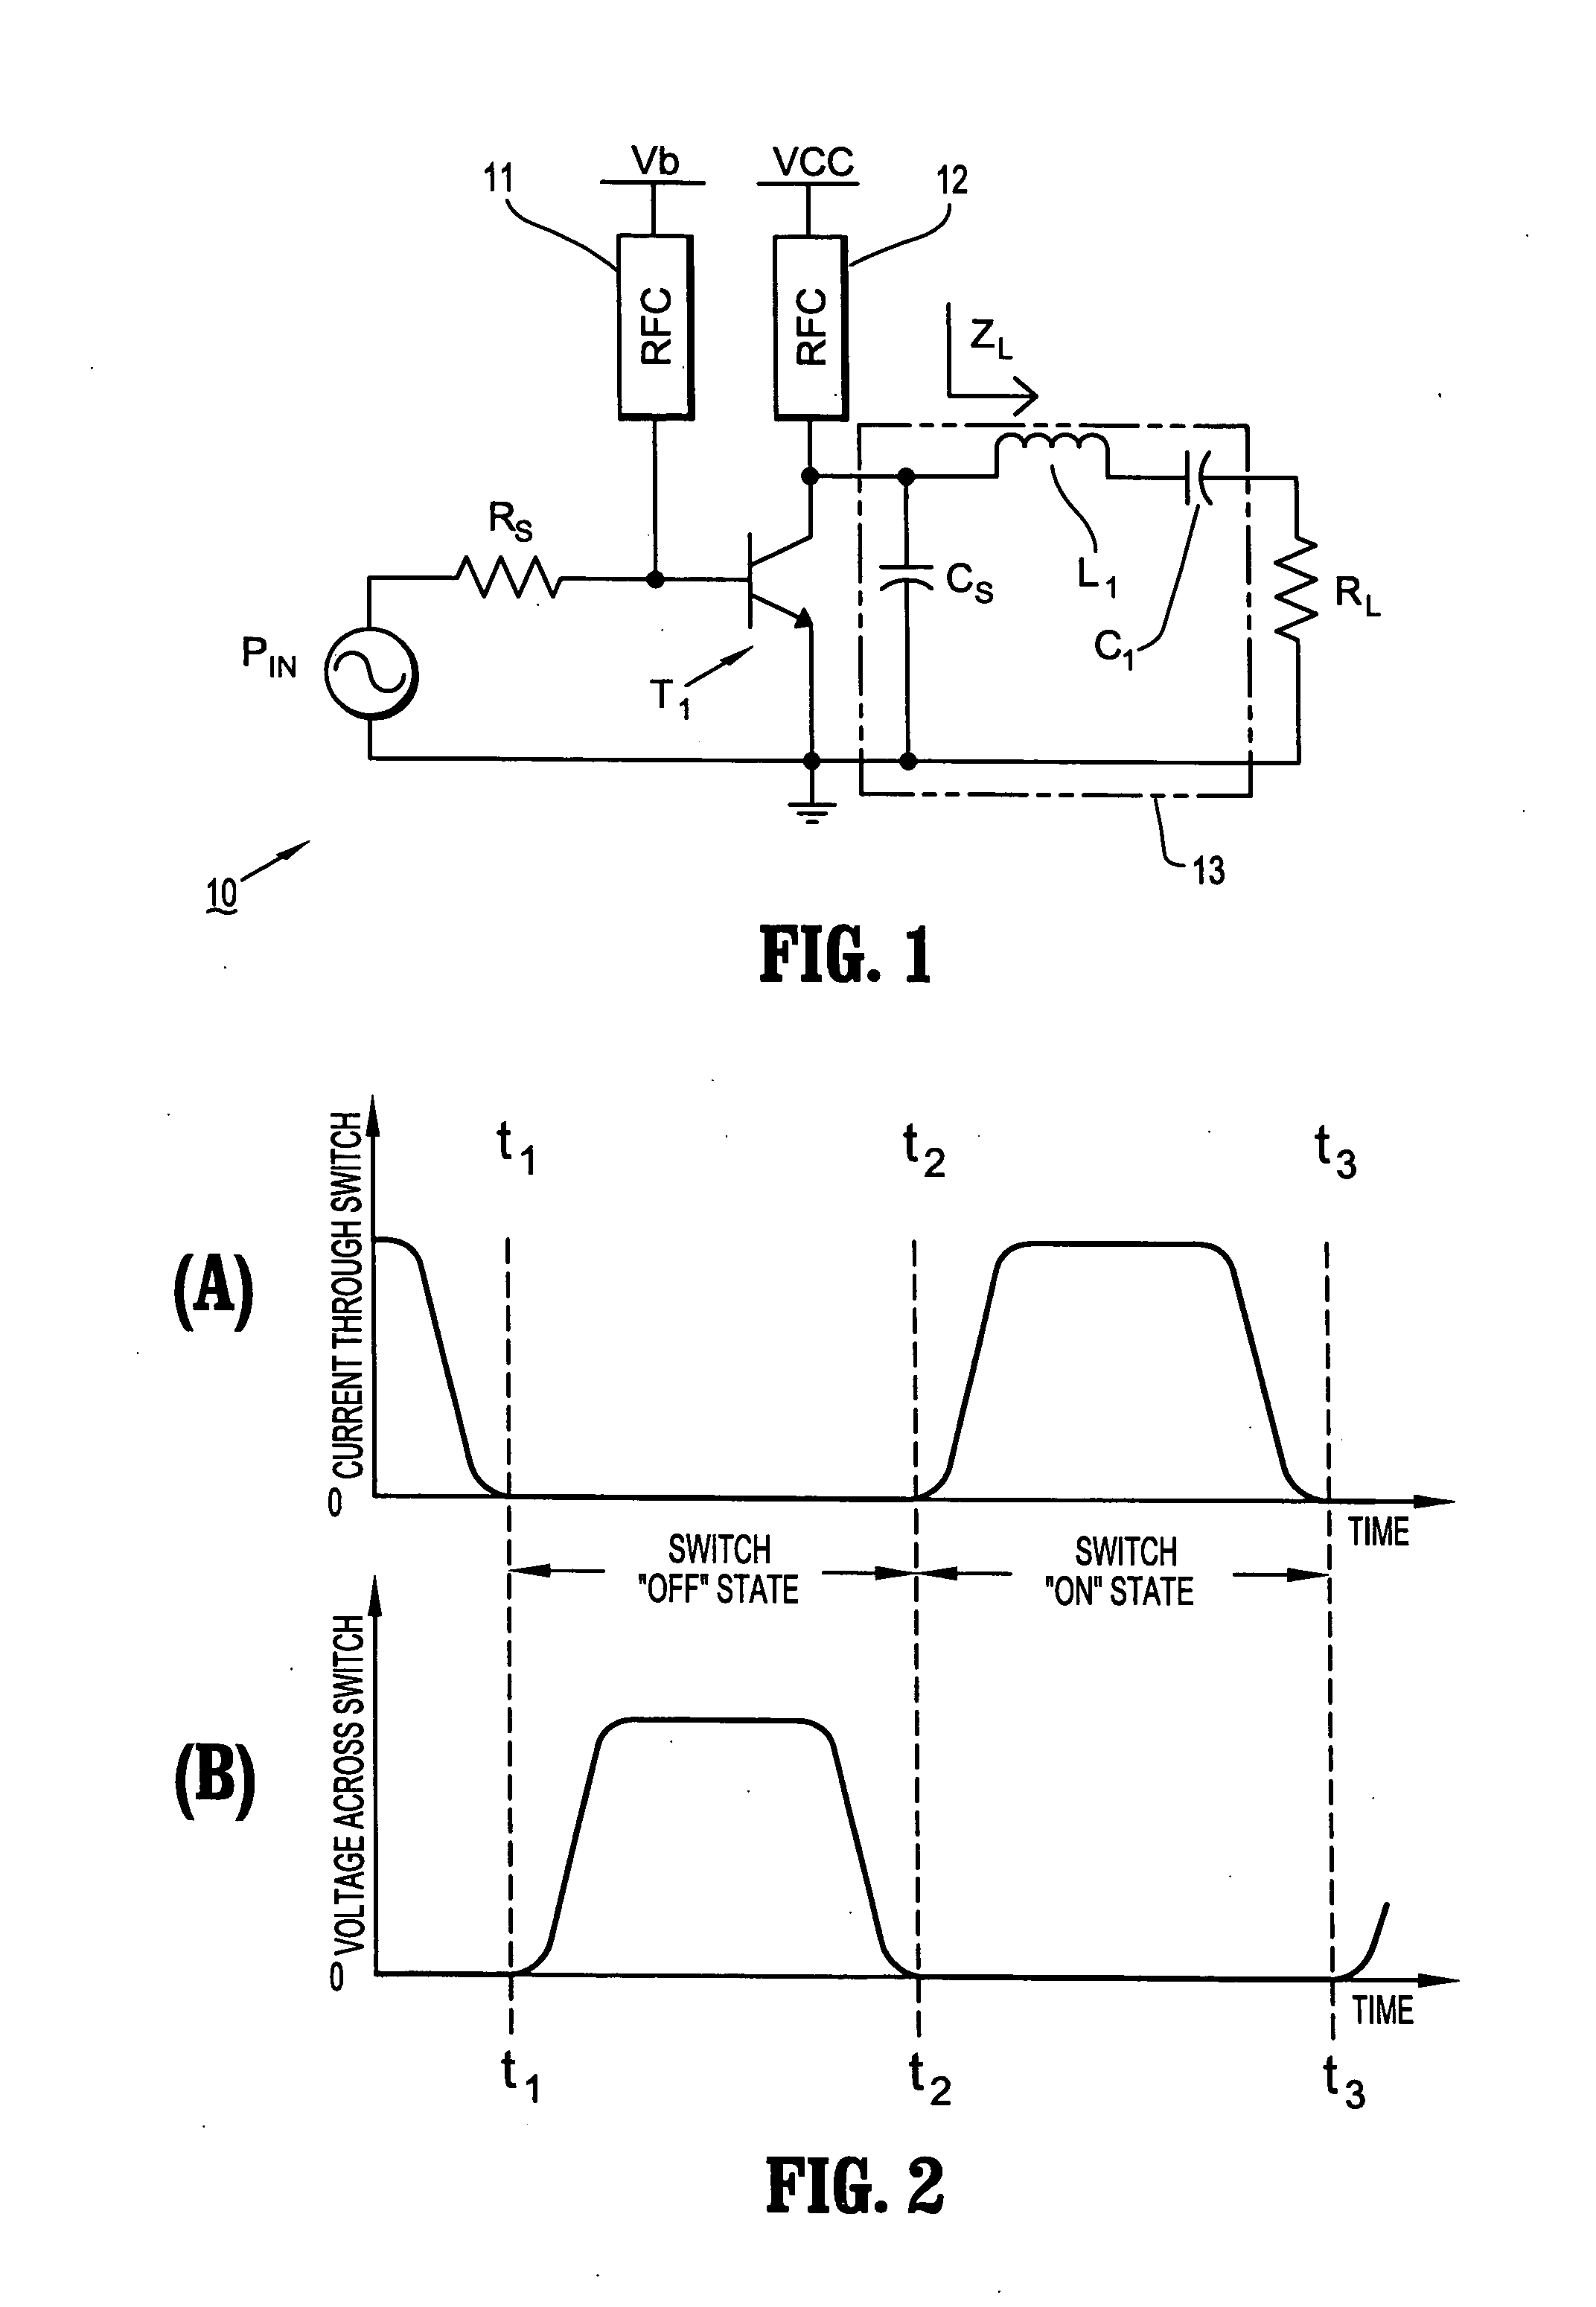 Circuits and methods for implementing power amplifiers for millimeter wave applications